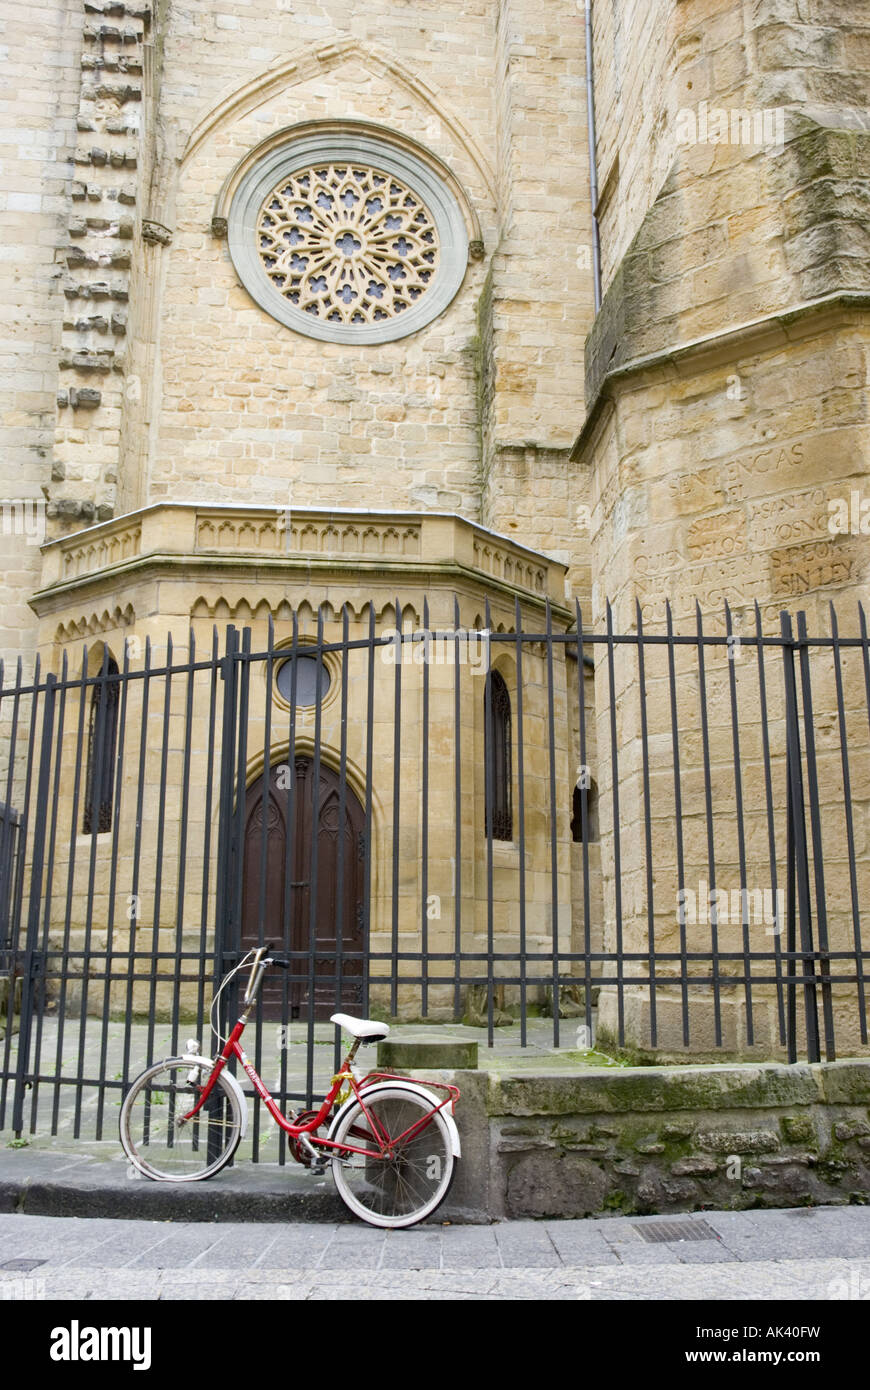 A bicycle is chained to a iron railings outside a church in San Sebastian's Old Town, Spain. Stock Photo